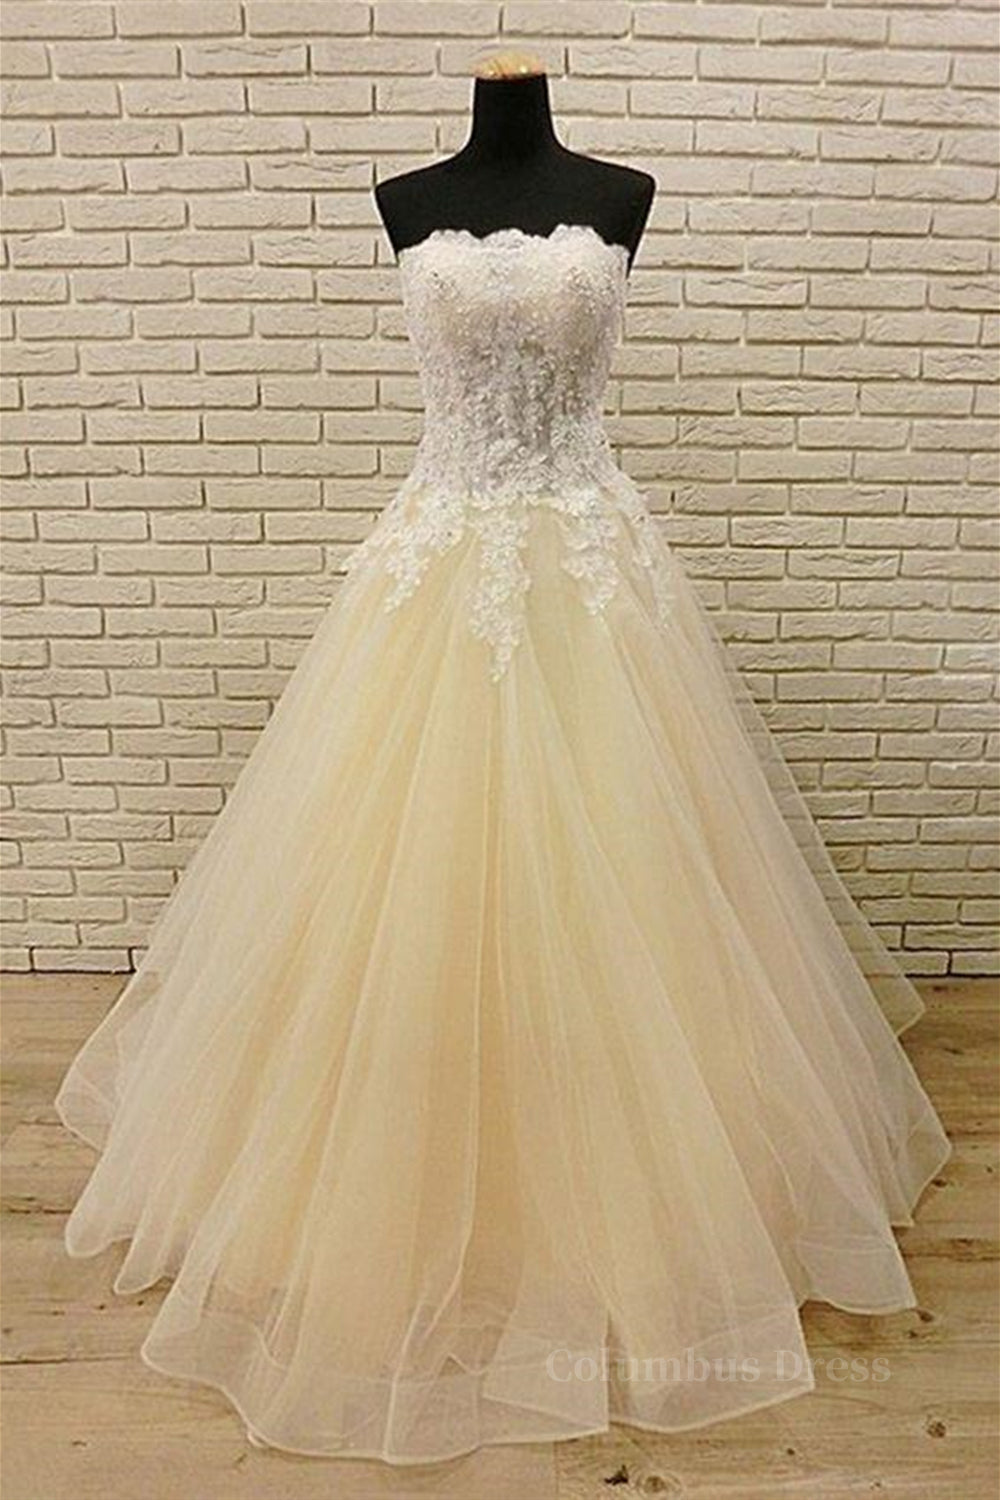 Strapless Champagne Long Corset Prom Dresses with Lace Appliques, Champagne Lace Corset Formal Evening Dresses outfit, Formal Dress Styles